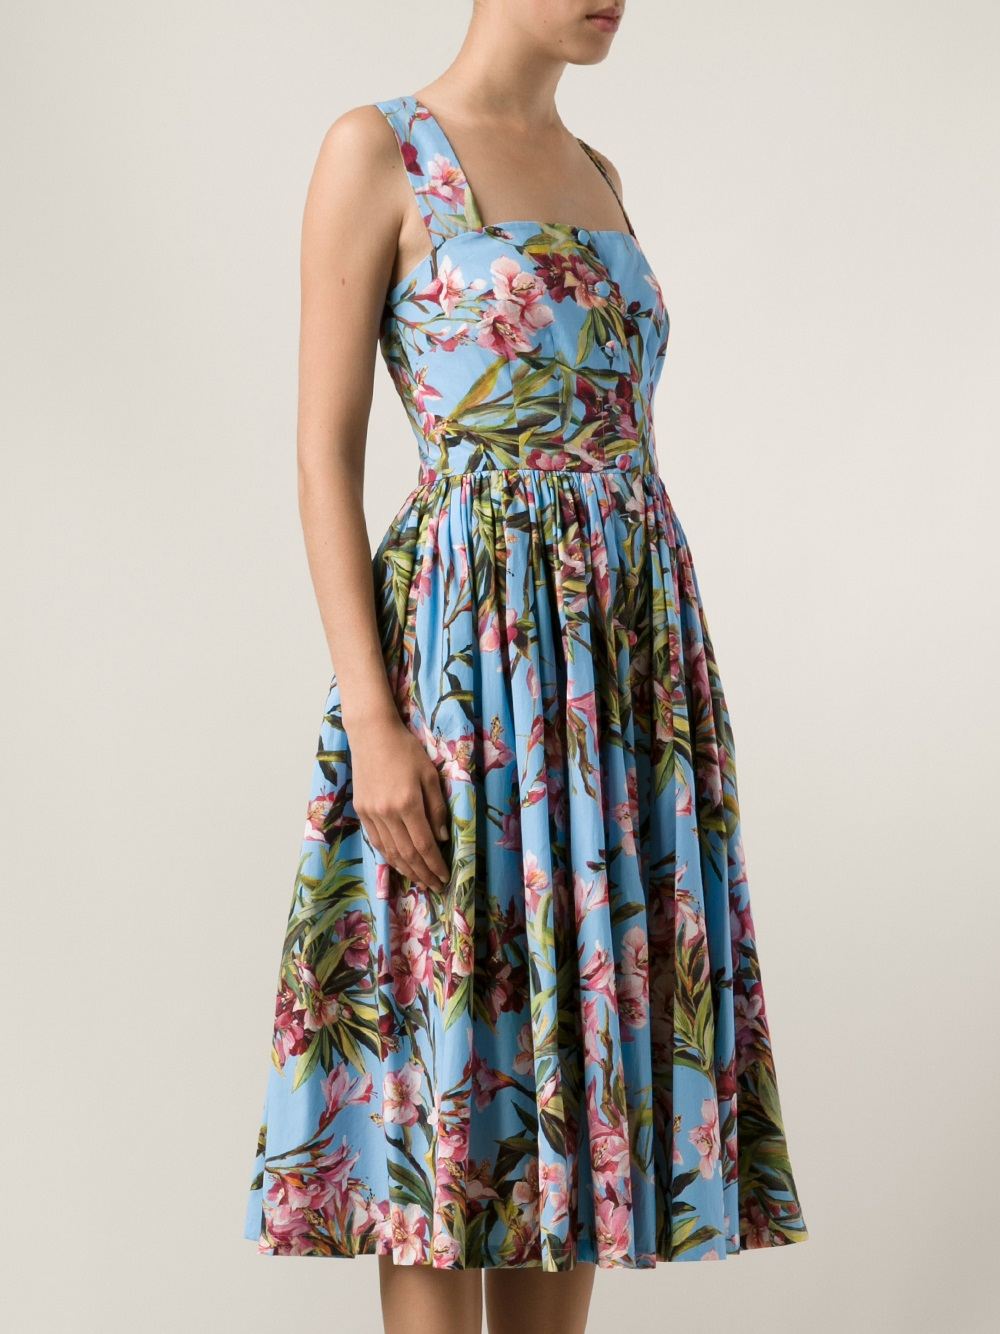 Dolce & Gabbana Skirted Floral Dress in Blue - Lyst